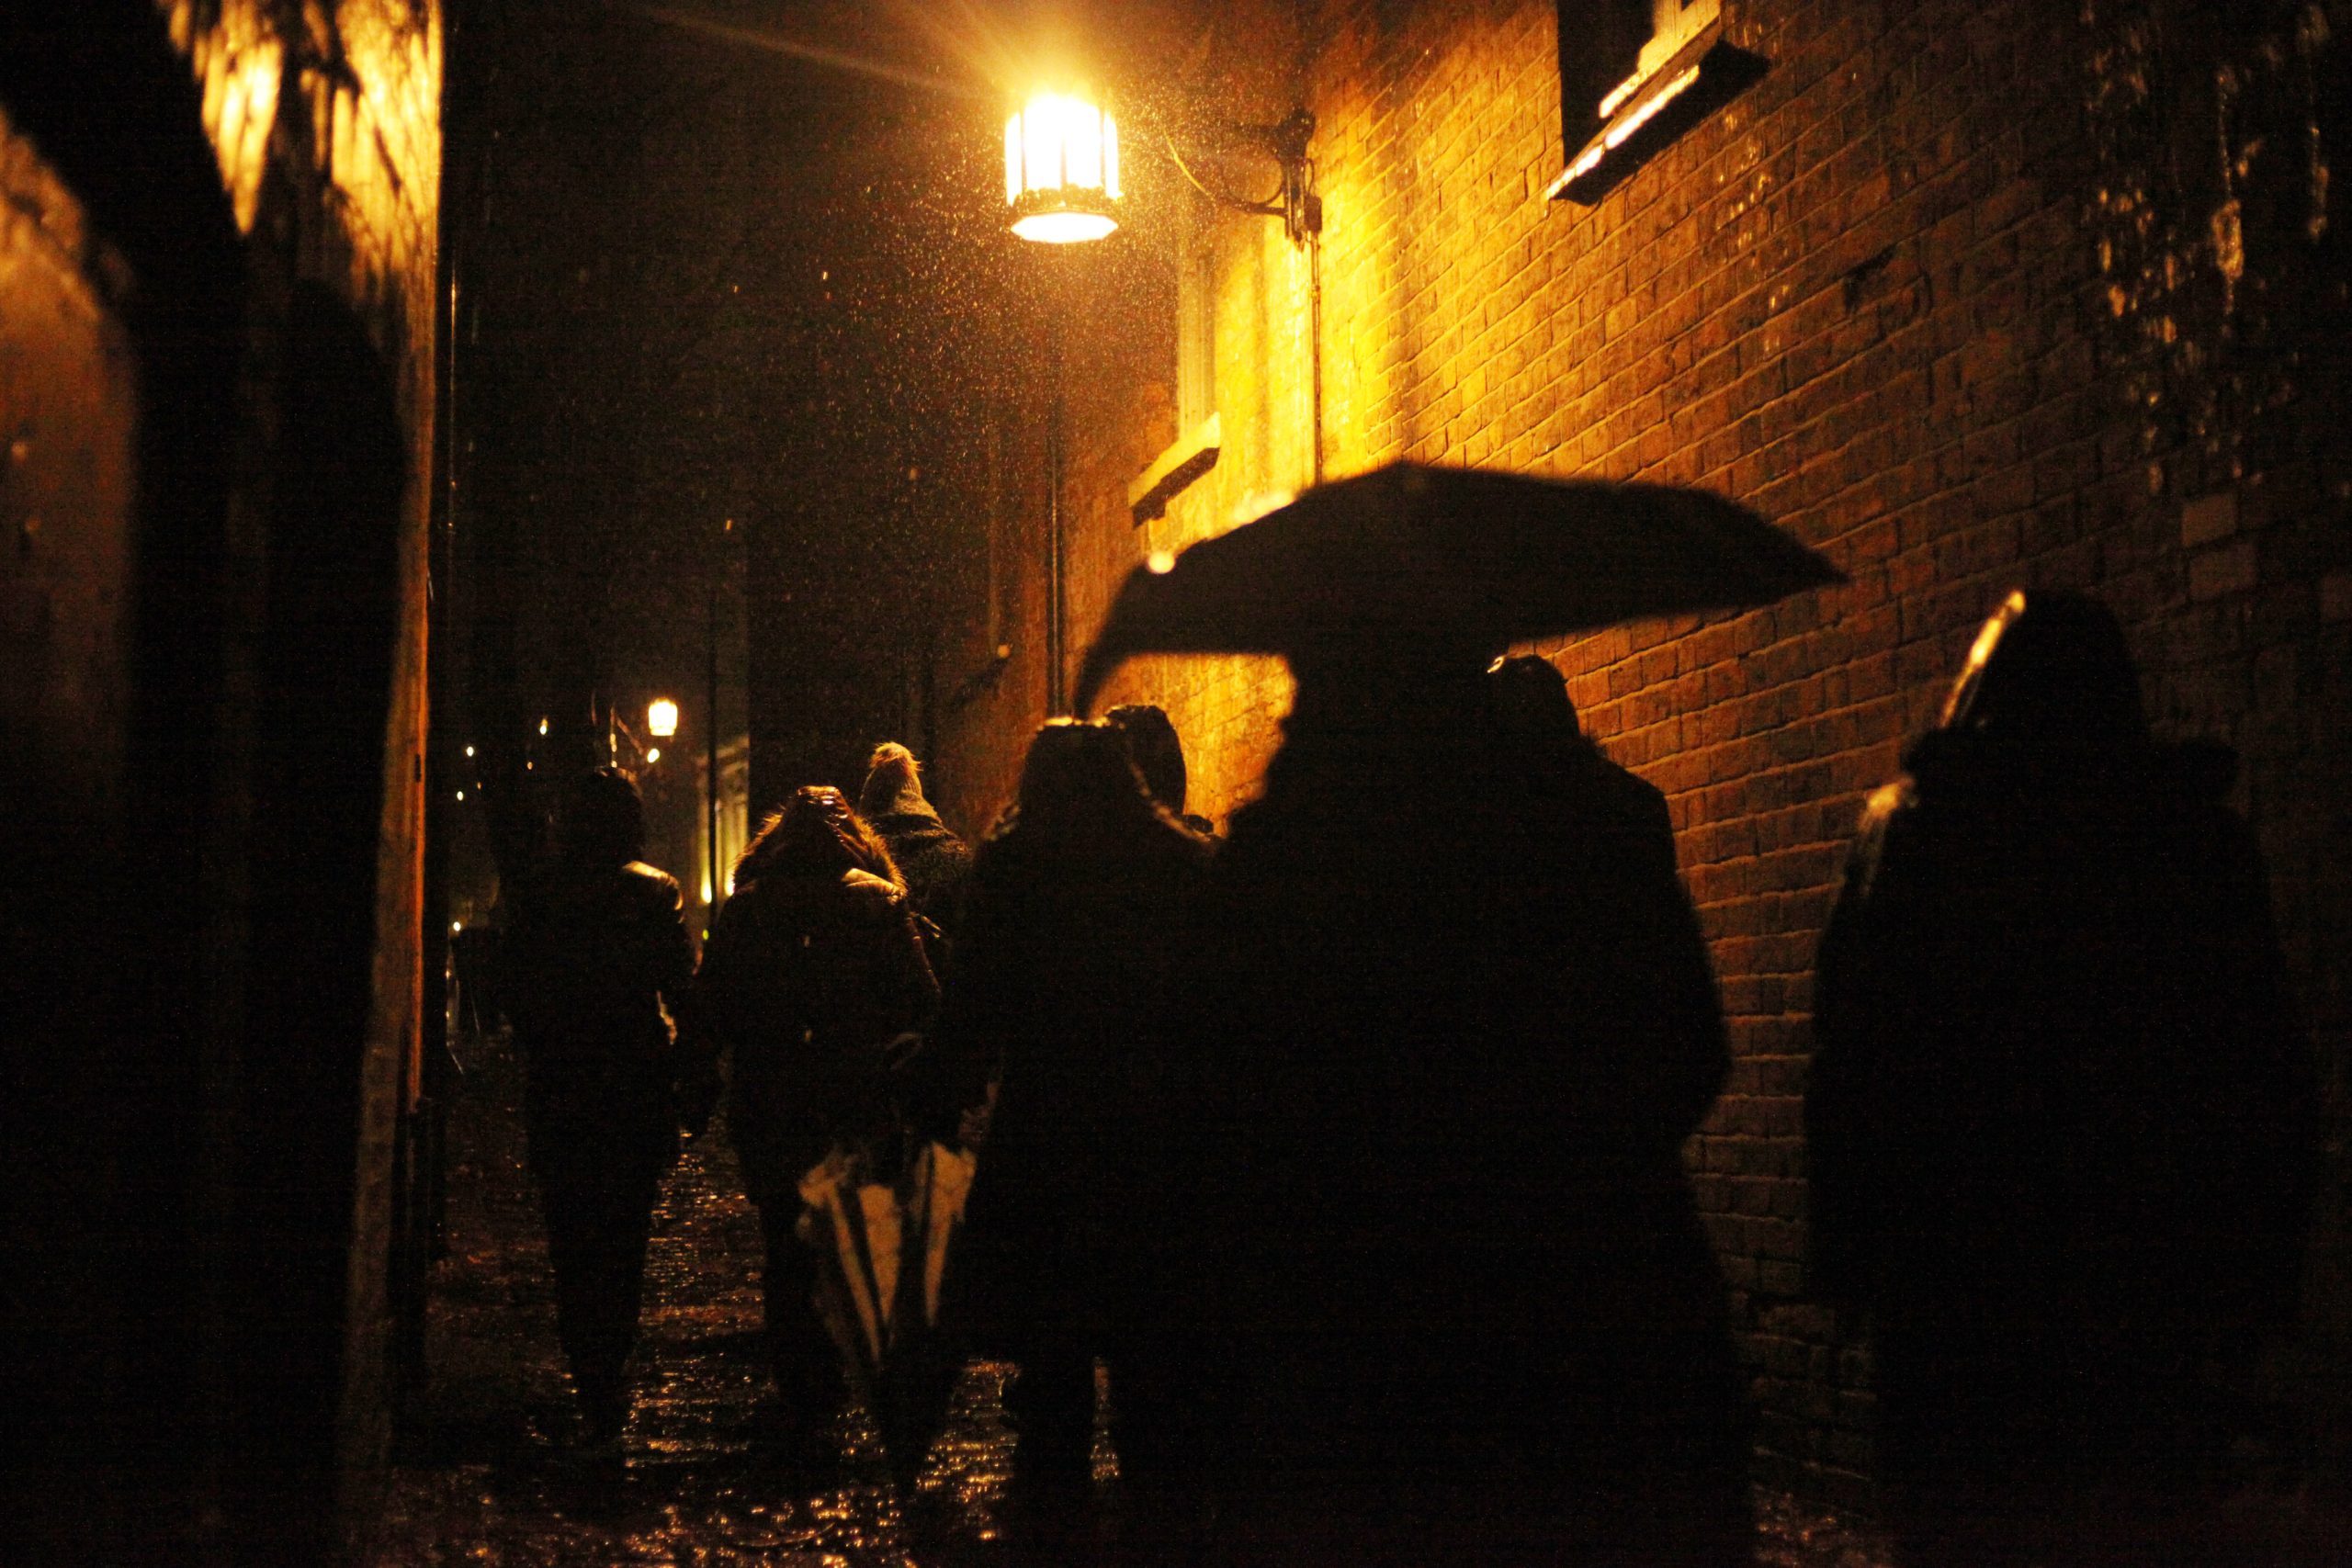 audience walking up a narrow cobblestone pathway at nighttime